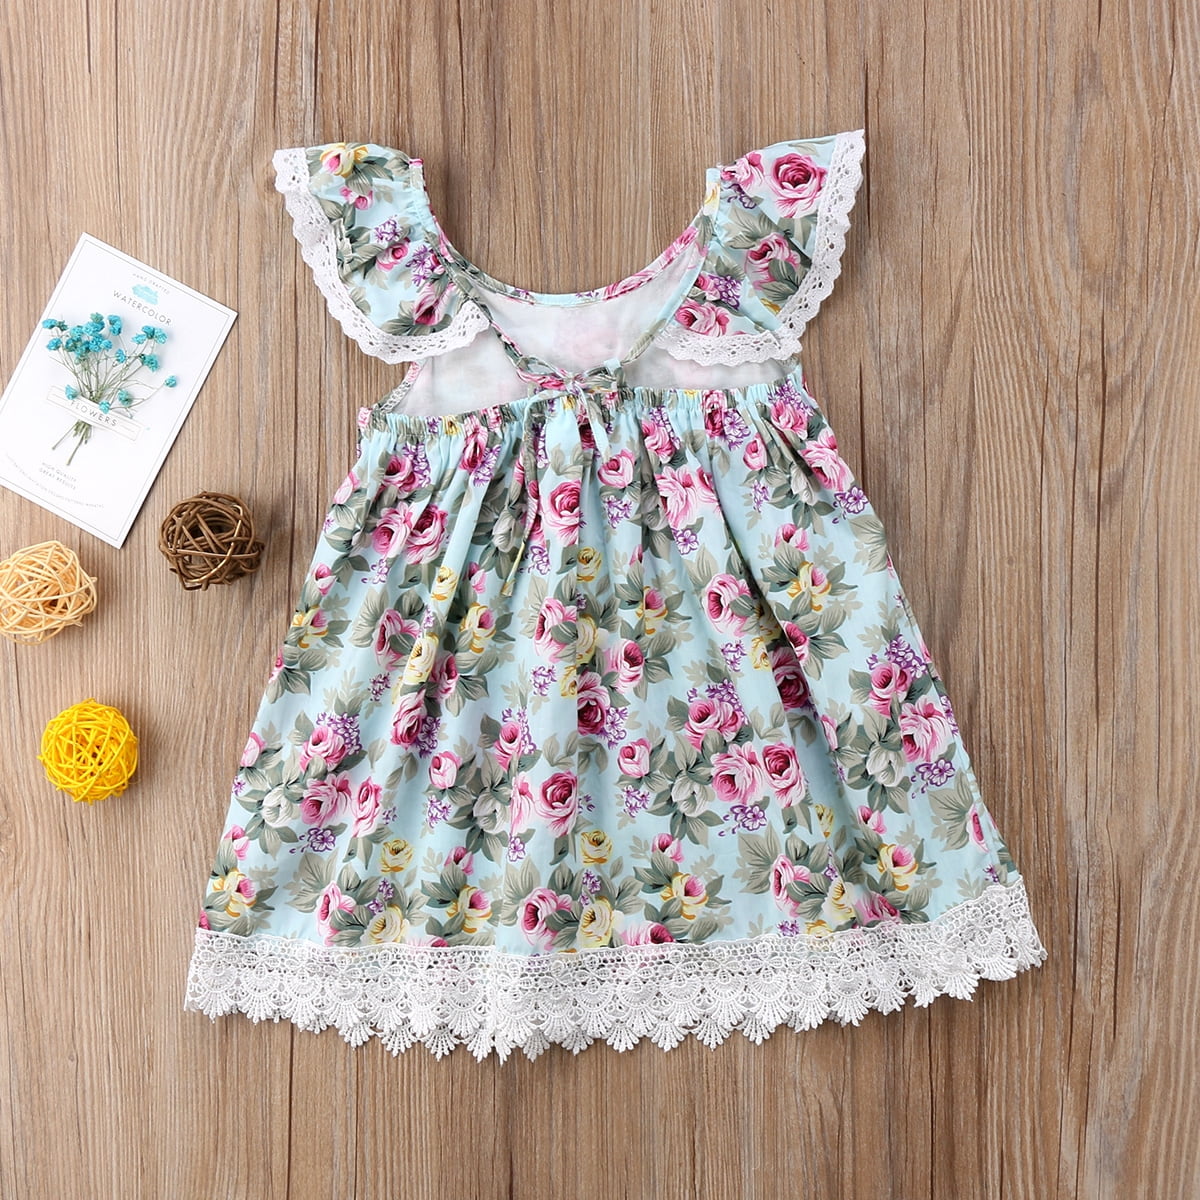 Toddler Baby Girl Kids Summer Backless Party Lace Princess Tassel Dress Clothes 